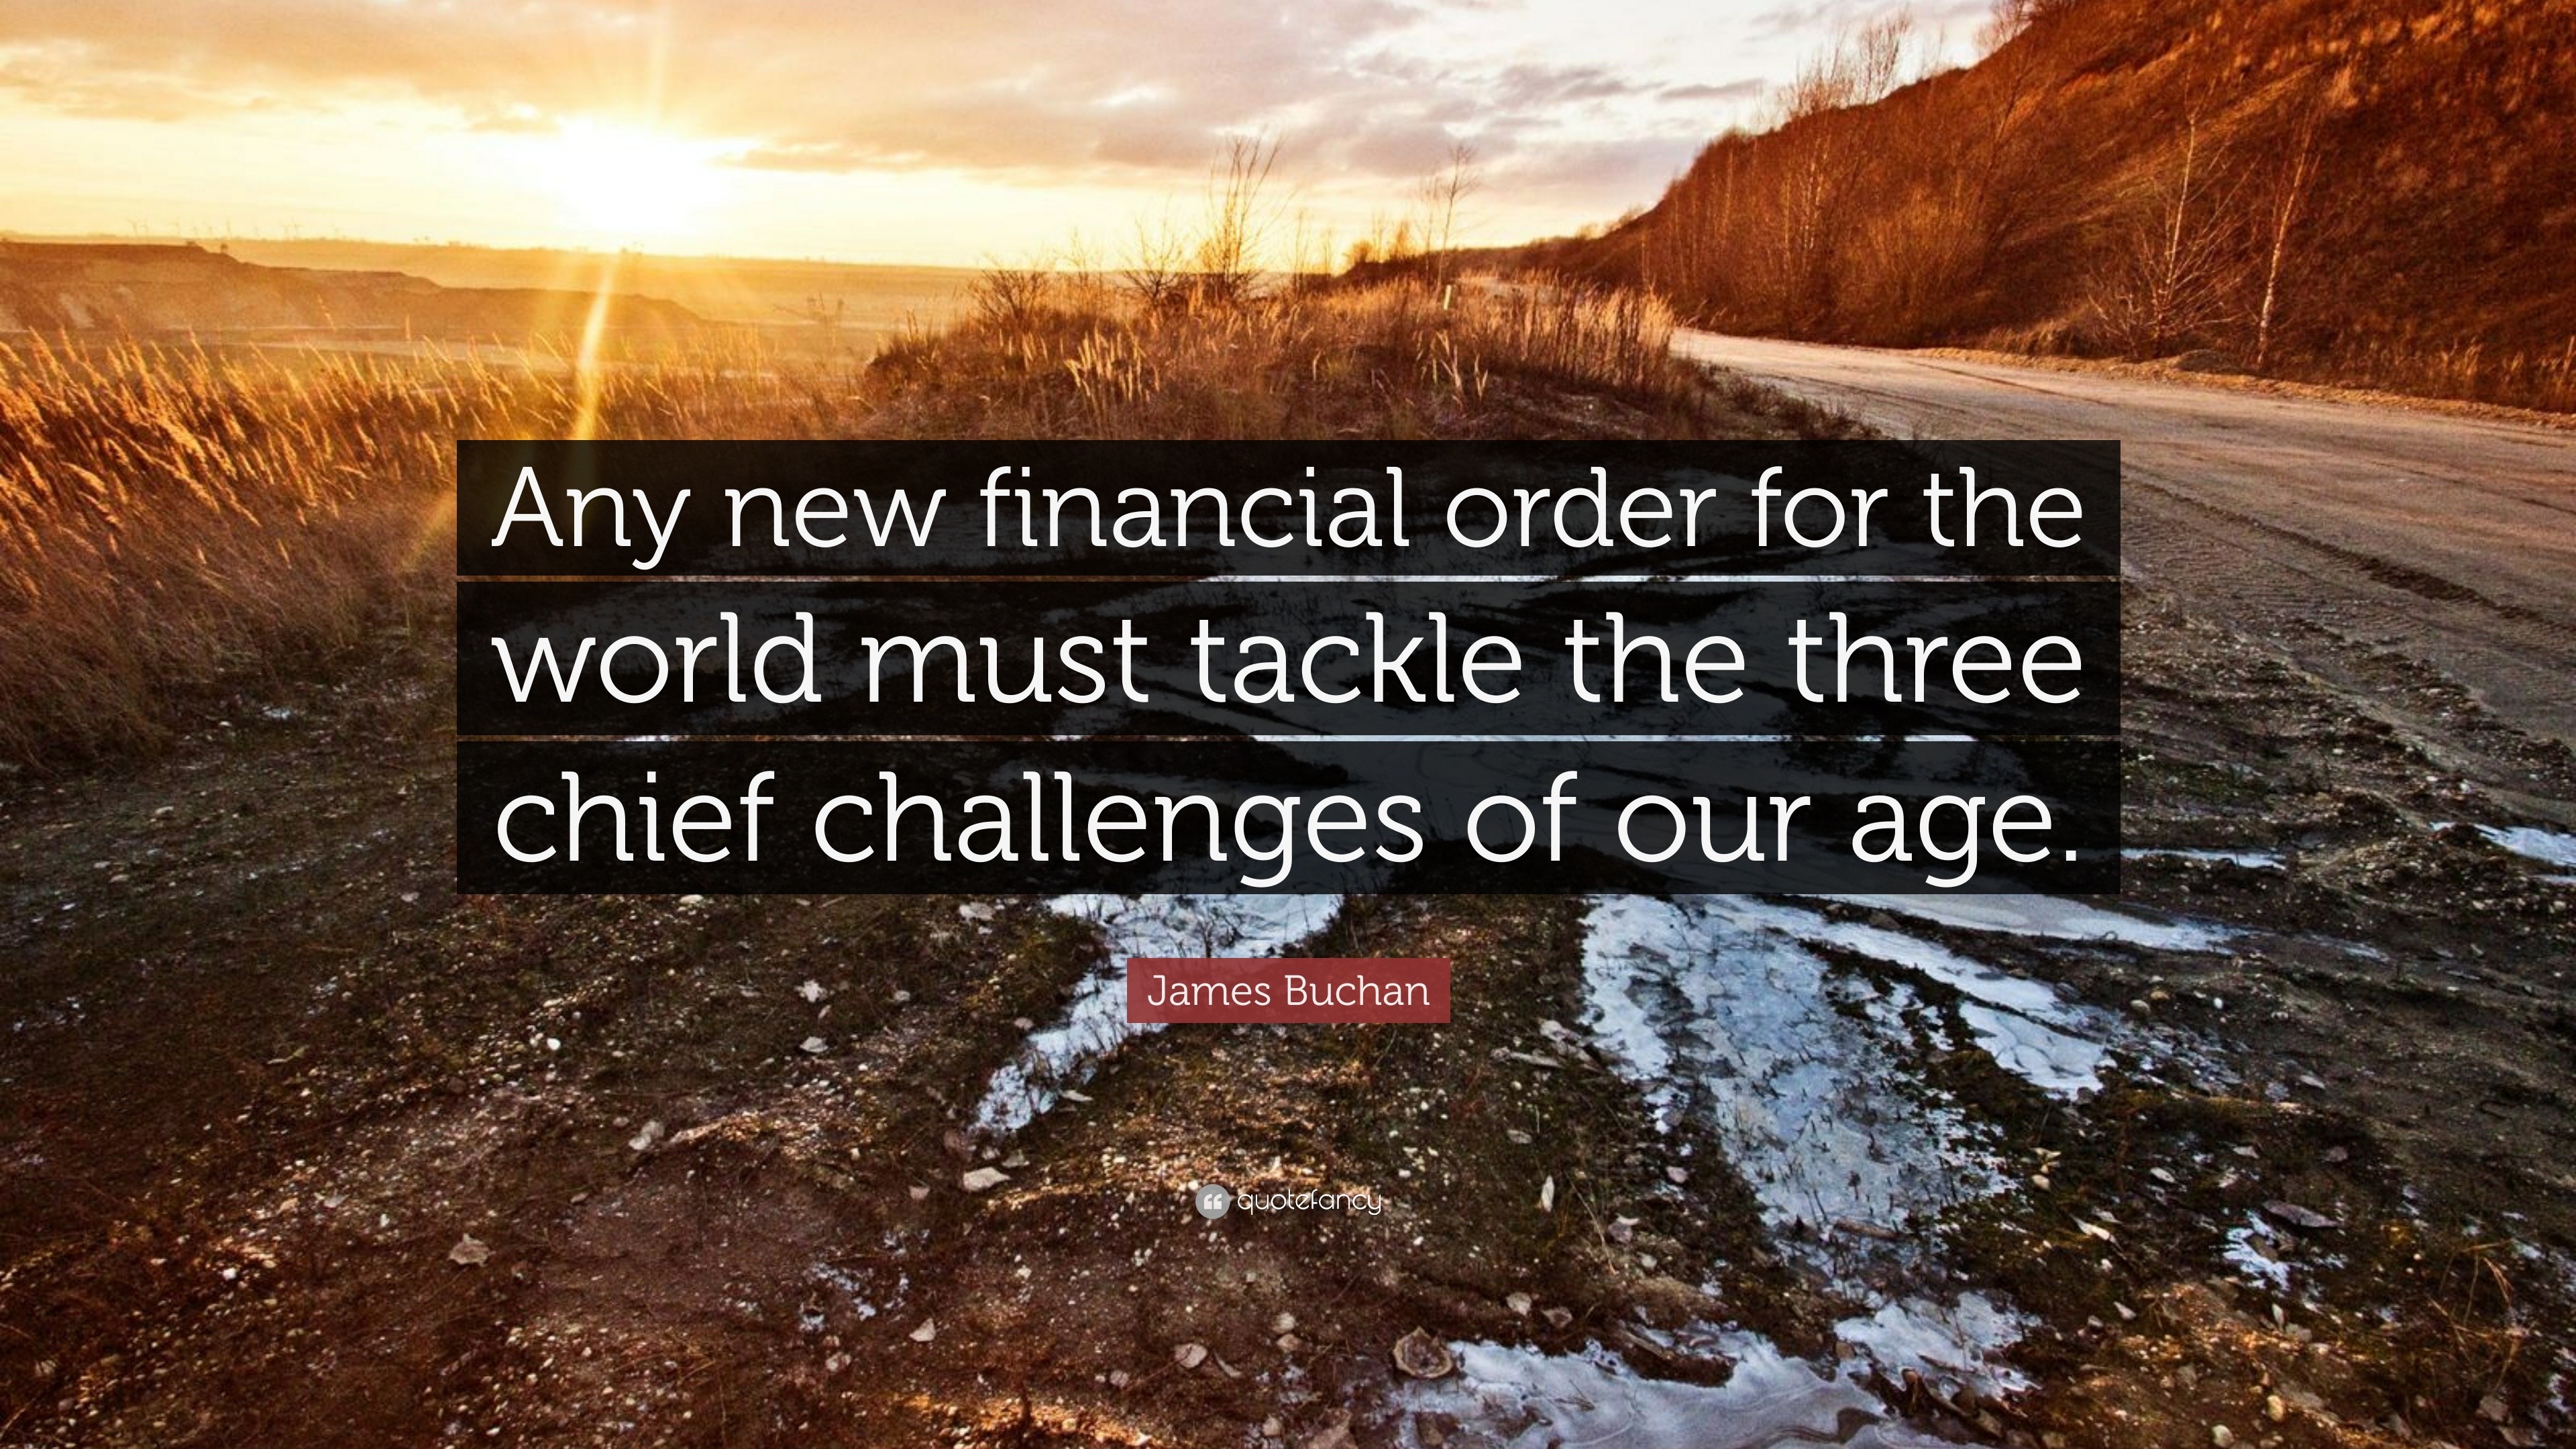 James Buchan Quote: “Any new financial order for the world must